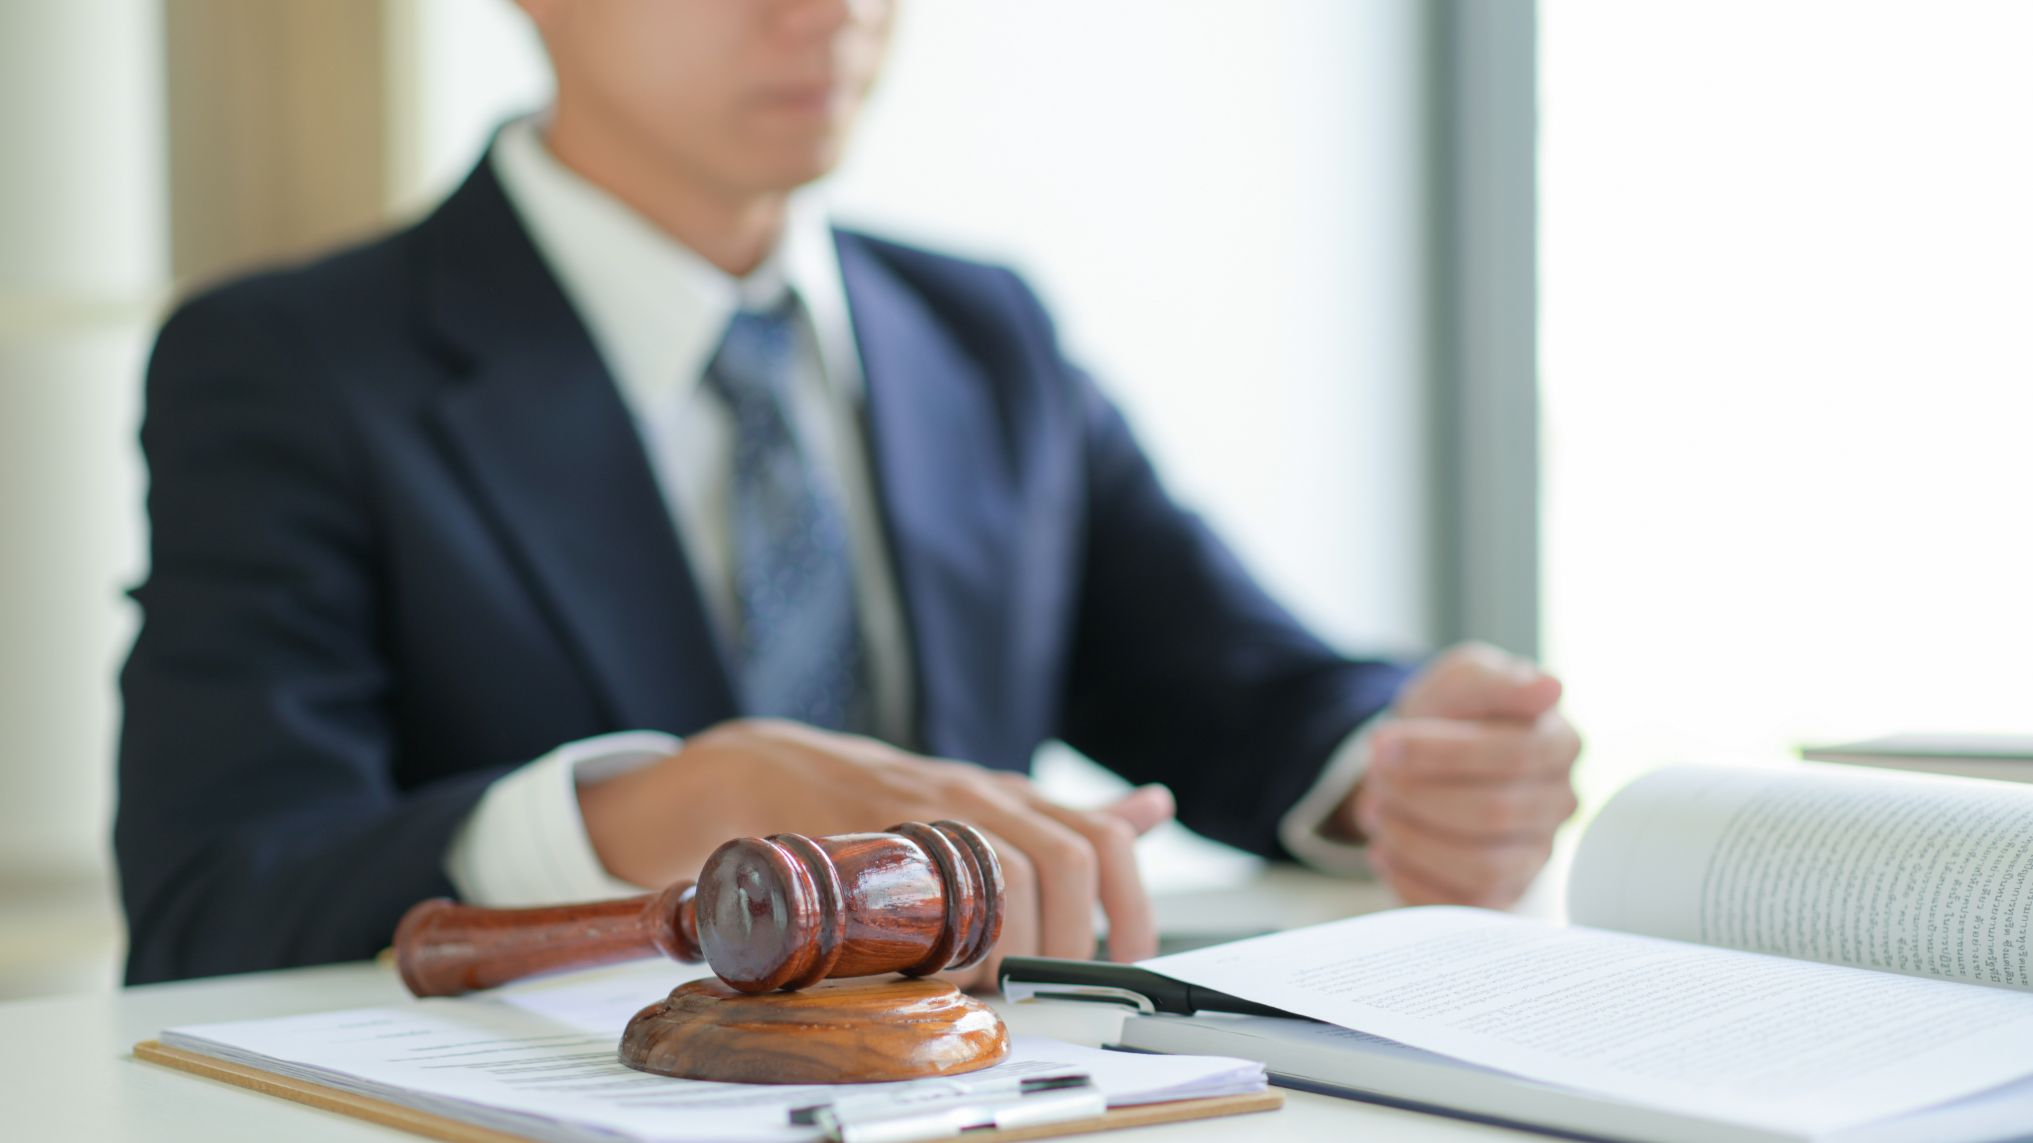 How to Select a Personal Injury Attorney